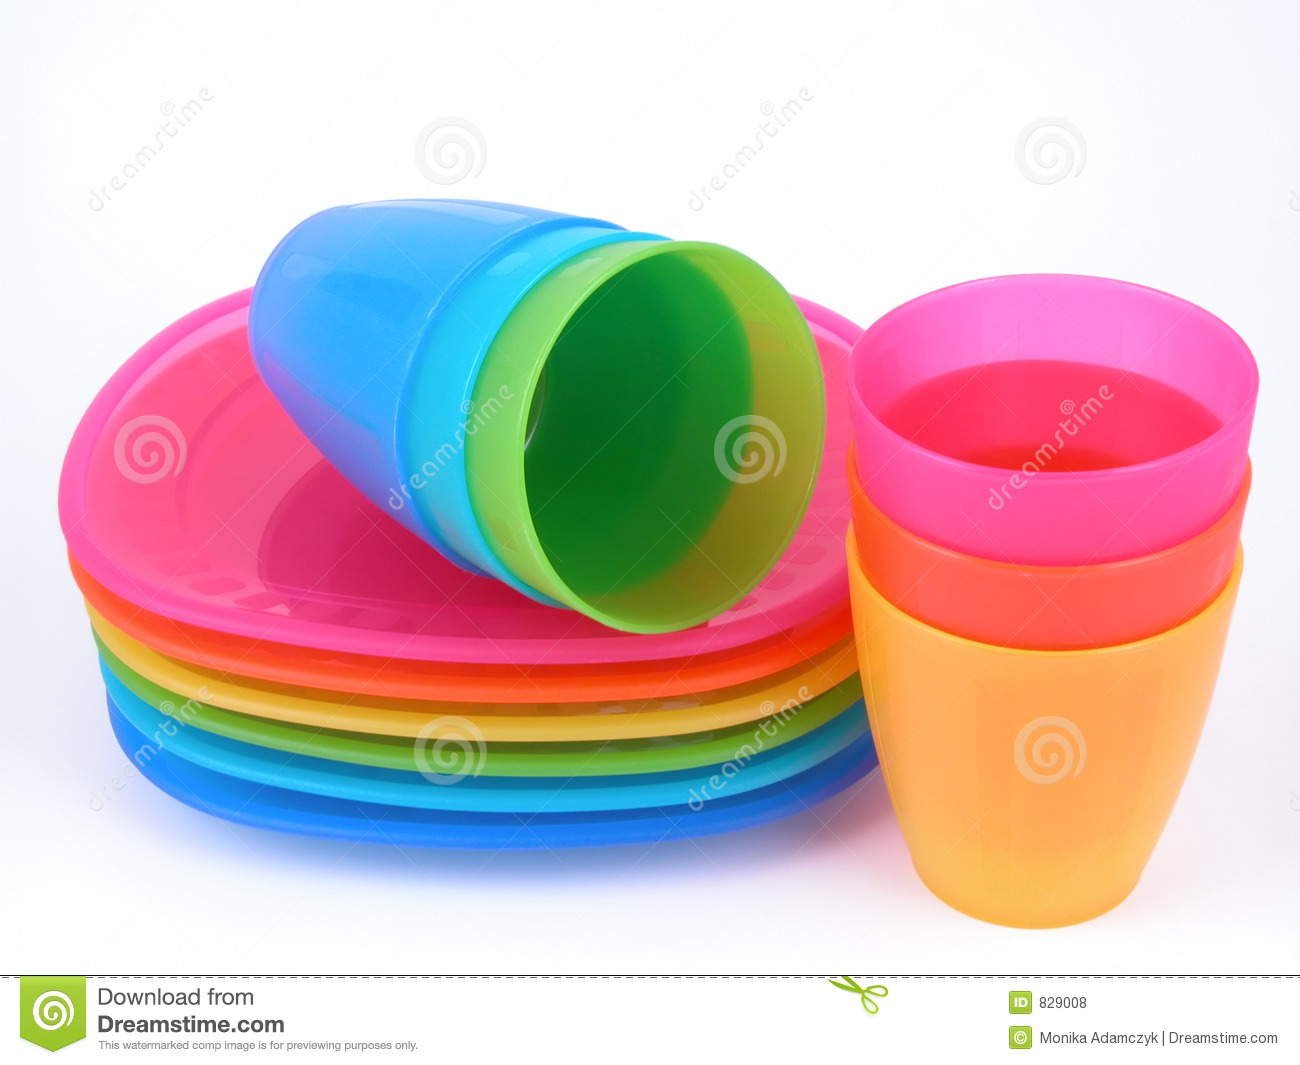 Plastic Cups And Plates Royalty Free Stock Photos   Image  829008